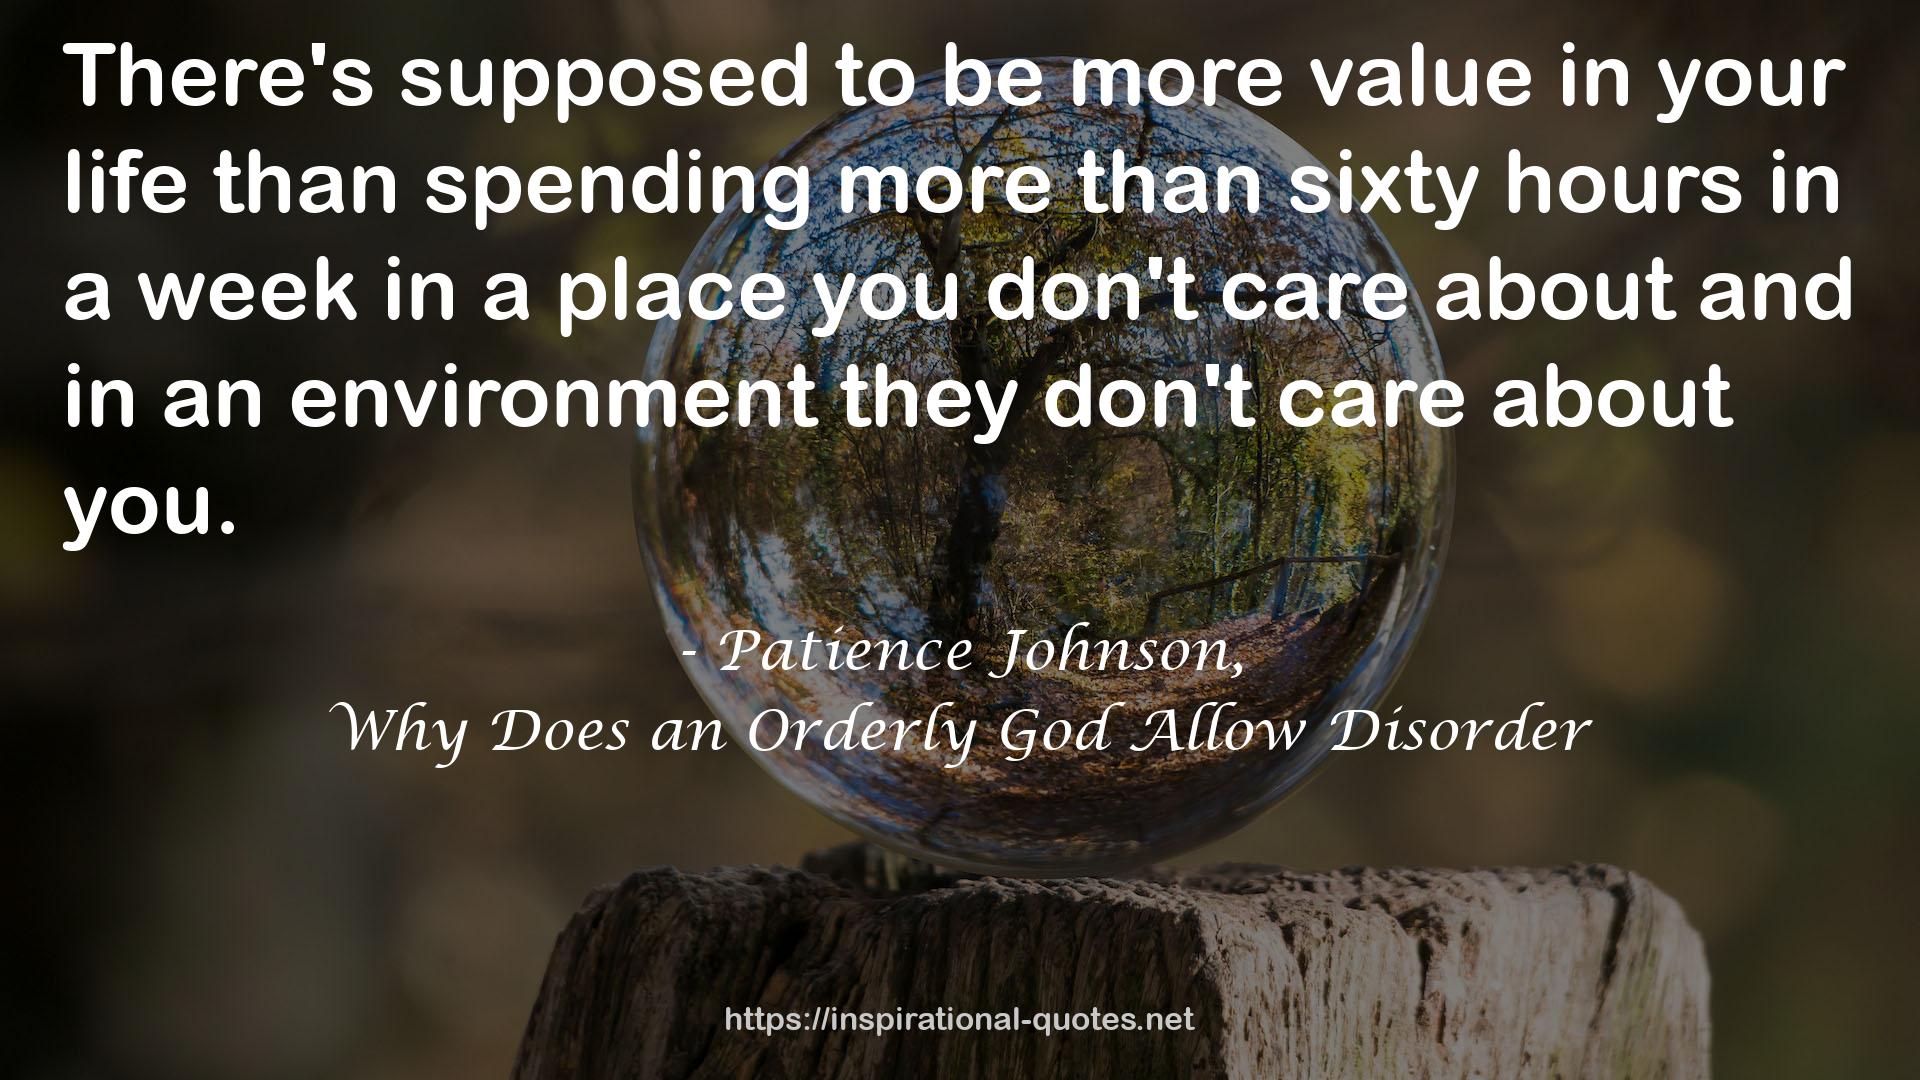 Patience Johnson, QUOTES